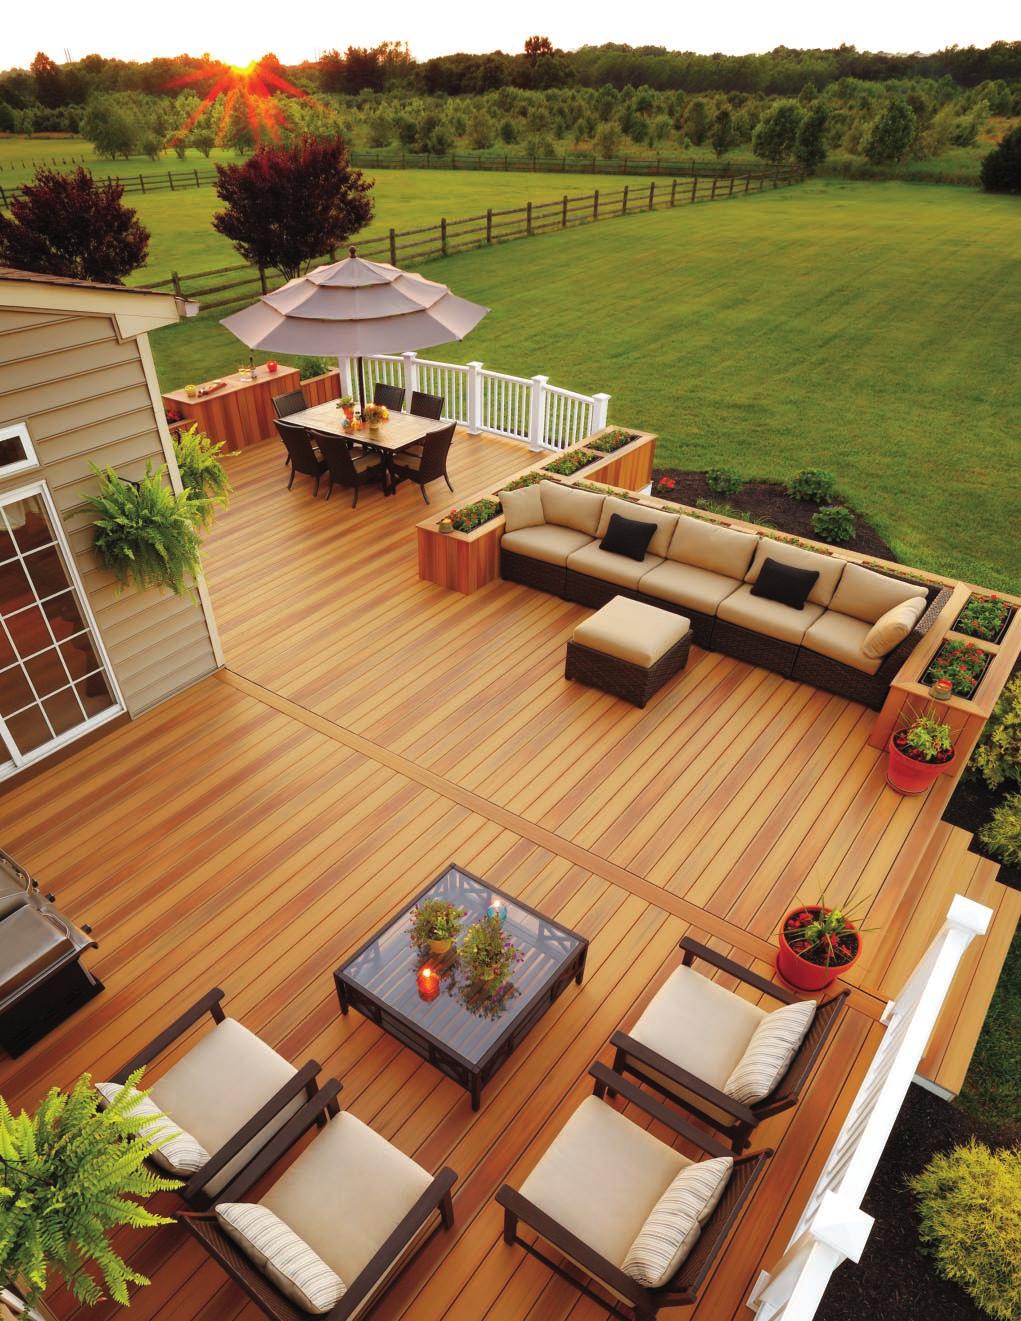 Our Siesta Hardwoods Collection decking features variegated, non-repeating wood grain that allows you to create your own custom outdoor oasis.